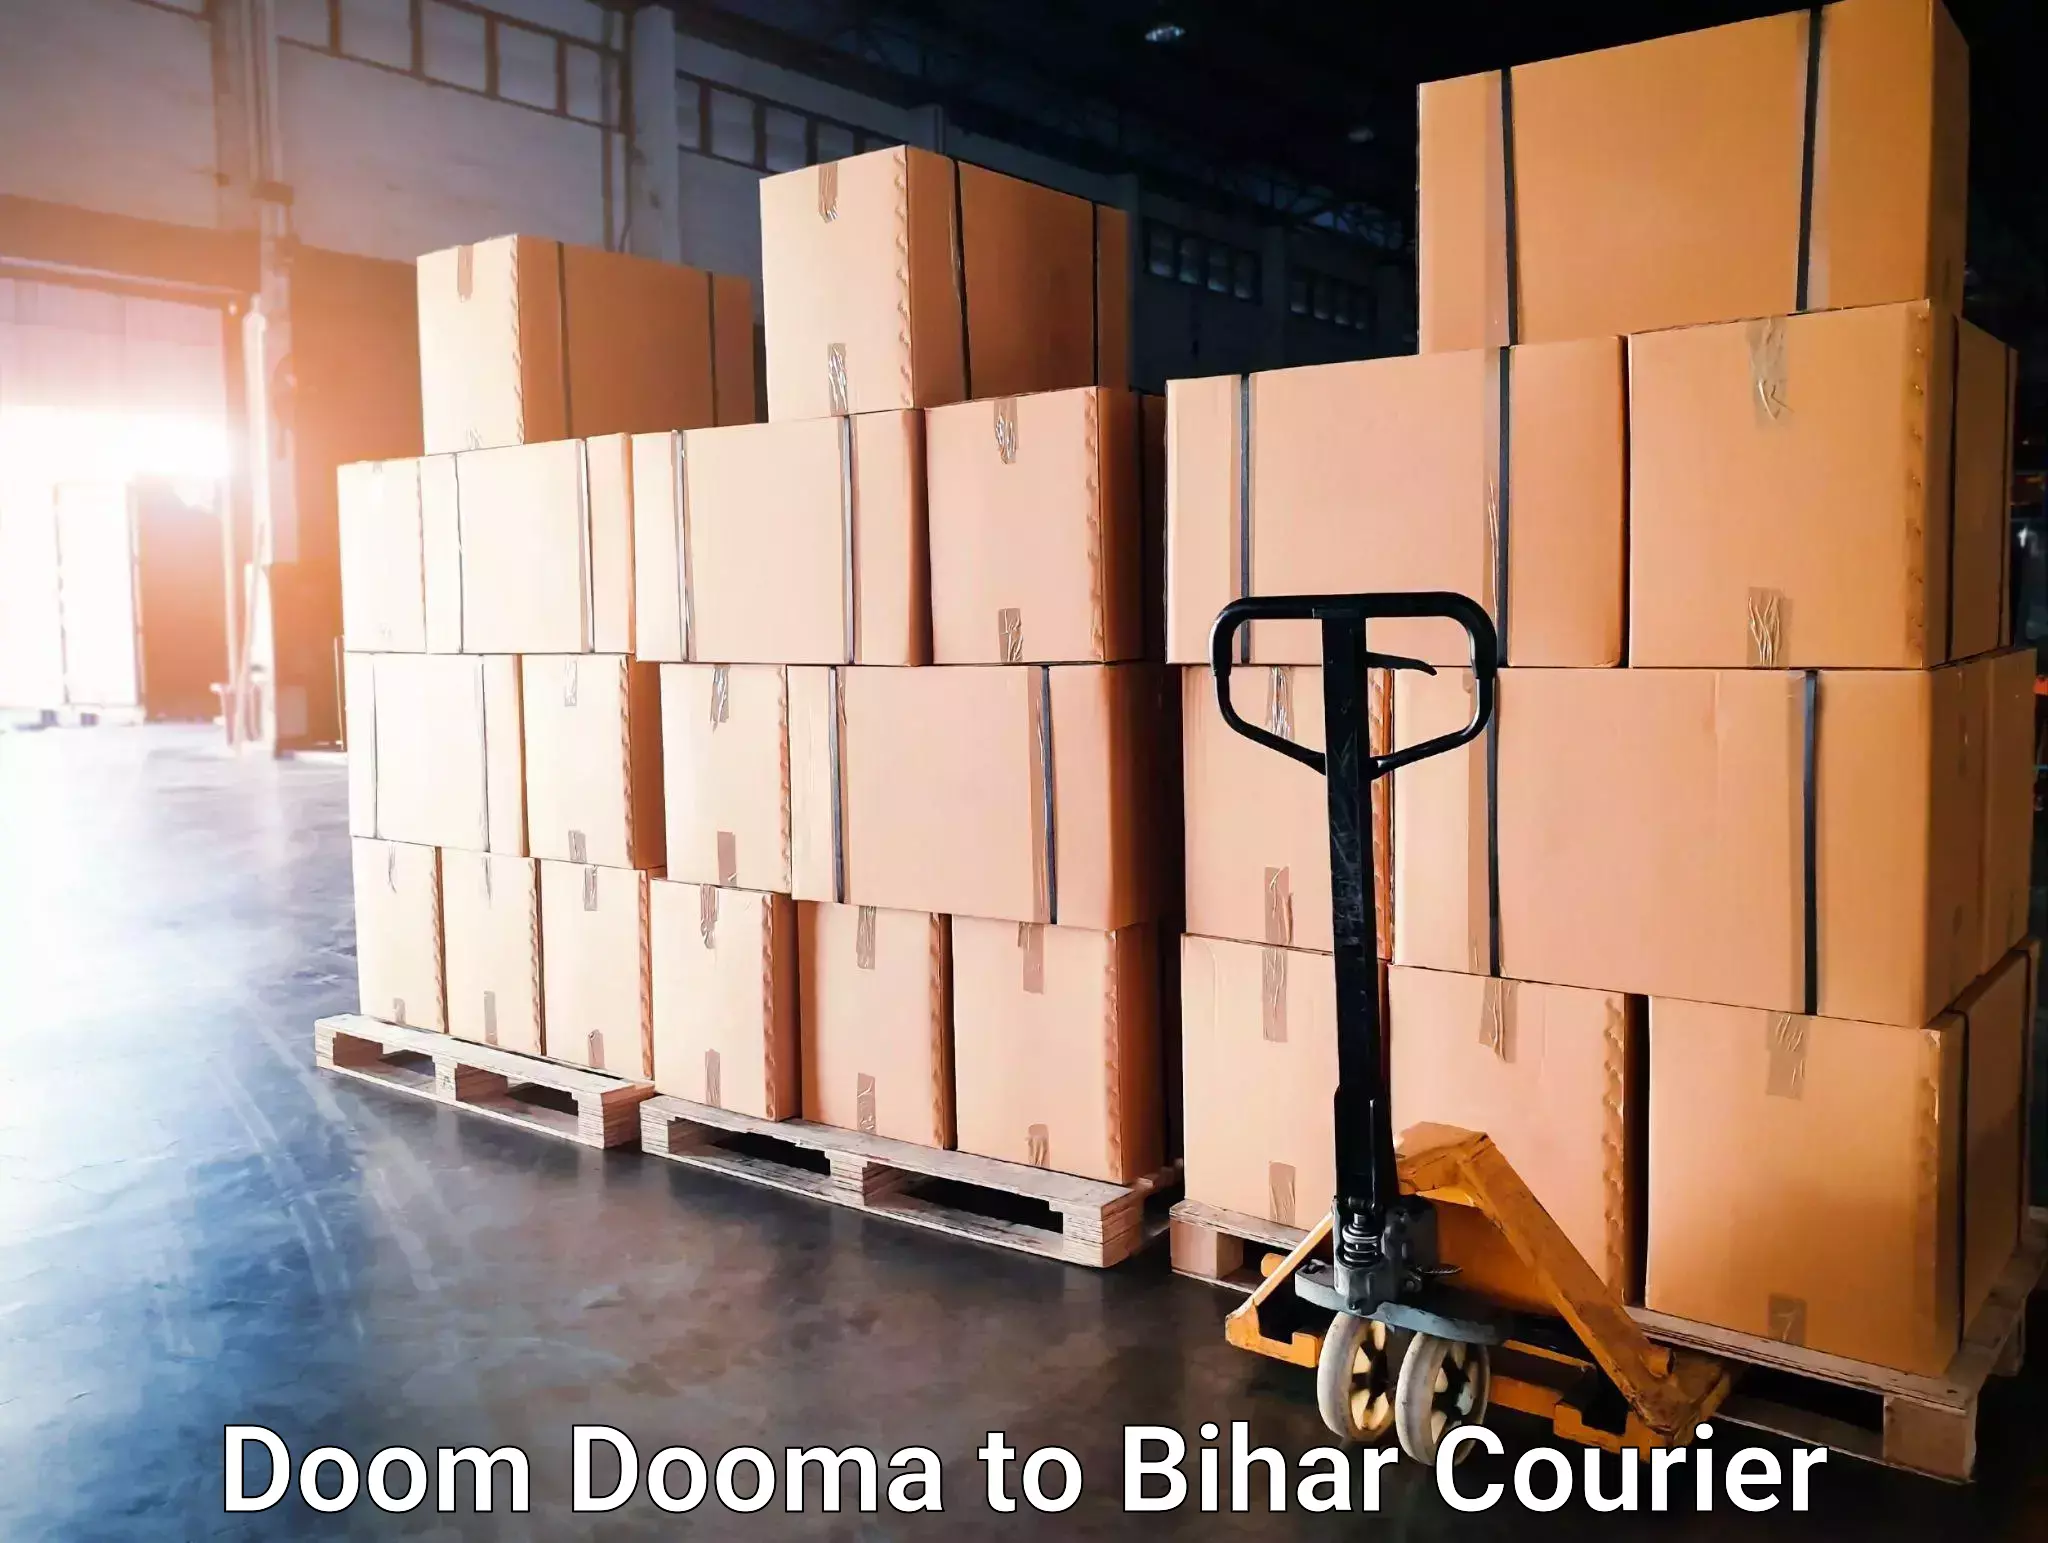 State-of-the-art courier technology Doom Dooma to Bihar